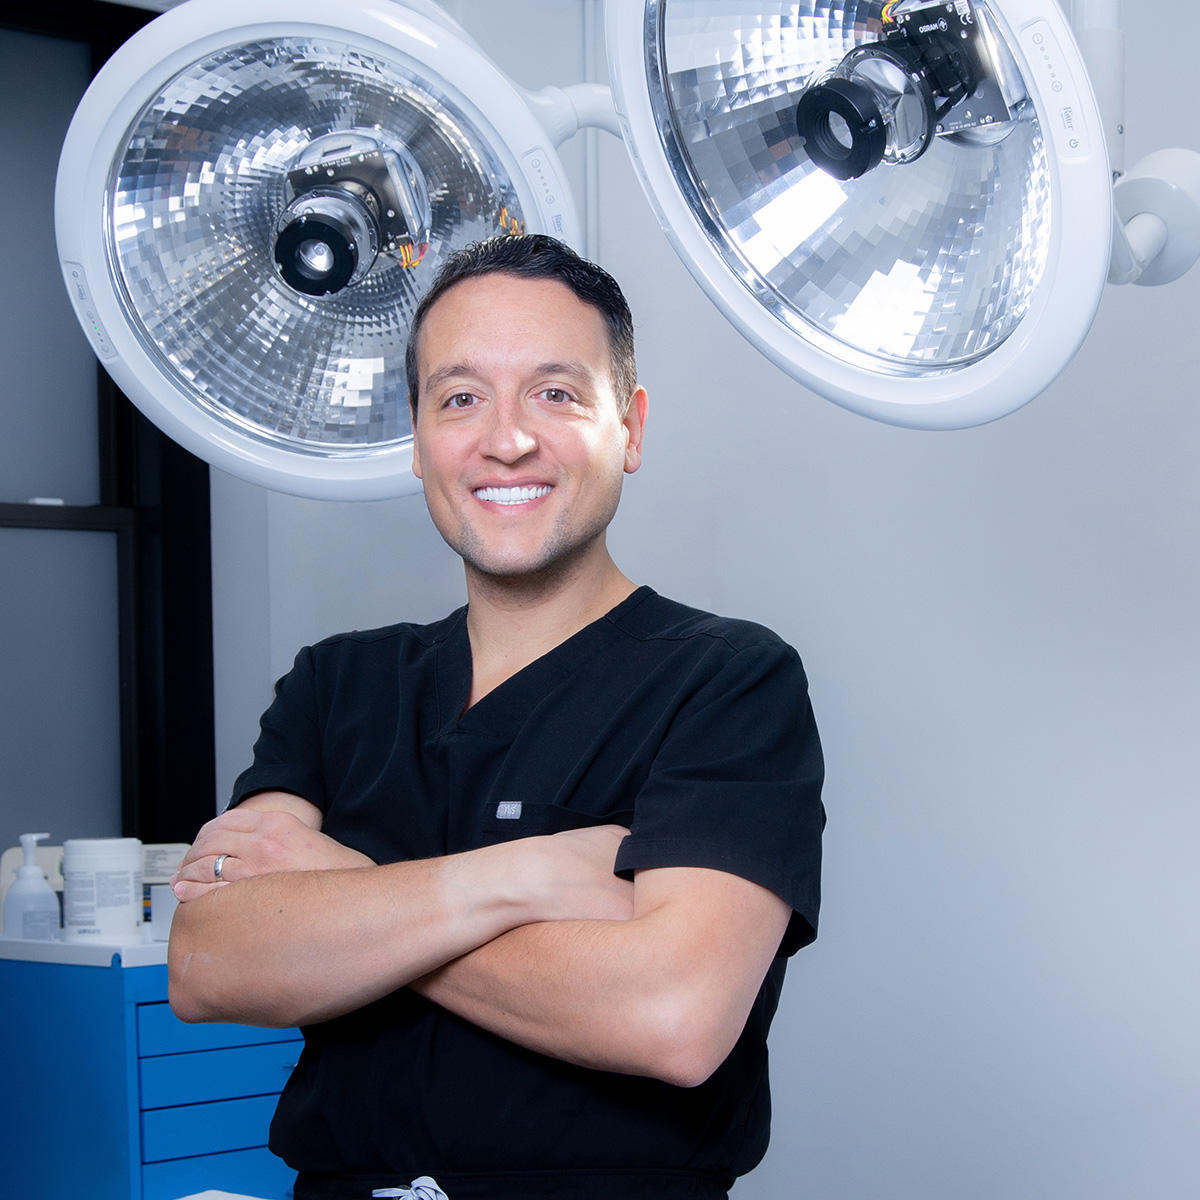 Plastic surgeon Dr. David Shokrian in the operating room